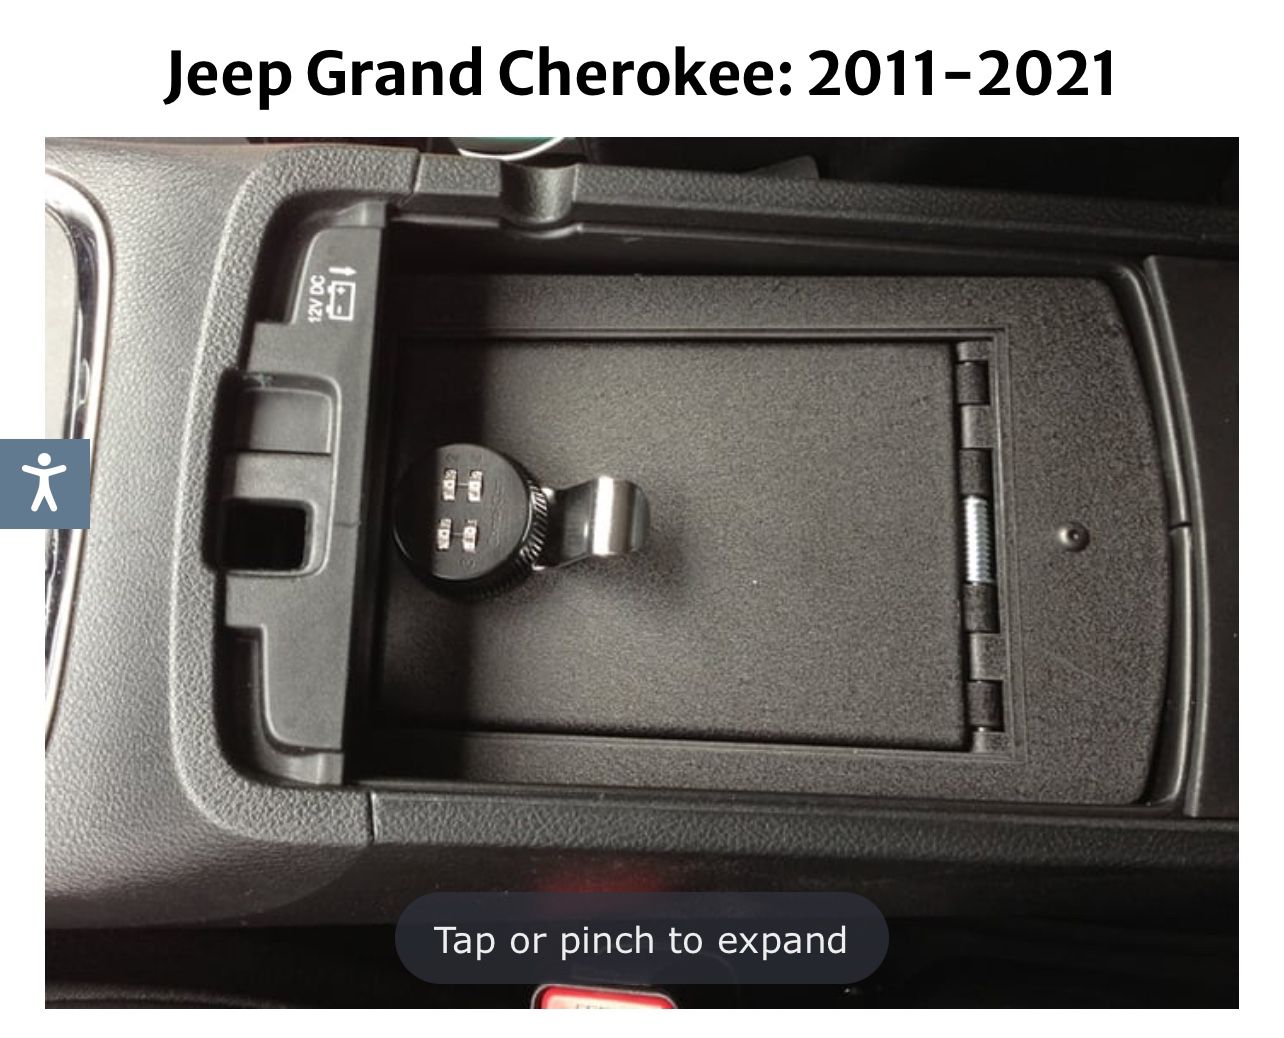 Console Vault- Jeep Grand Cherokee (2011-2021 Models)